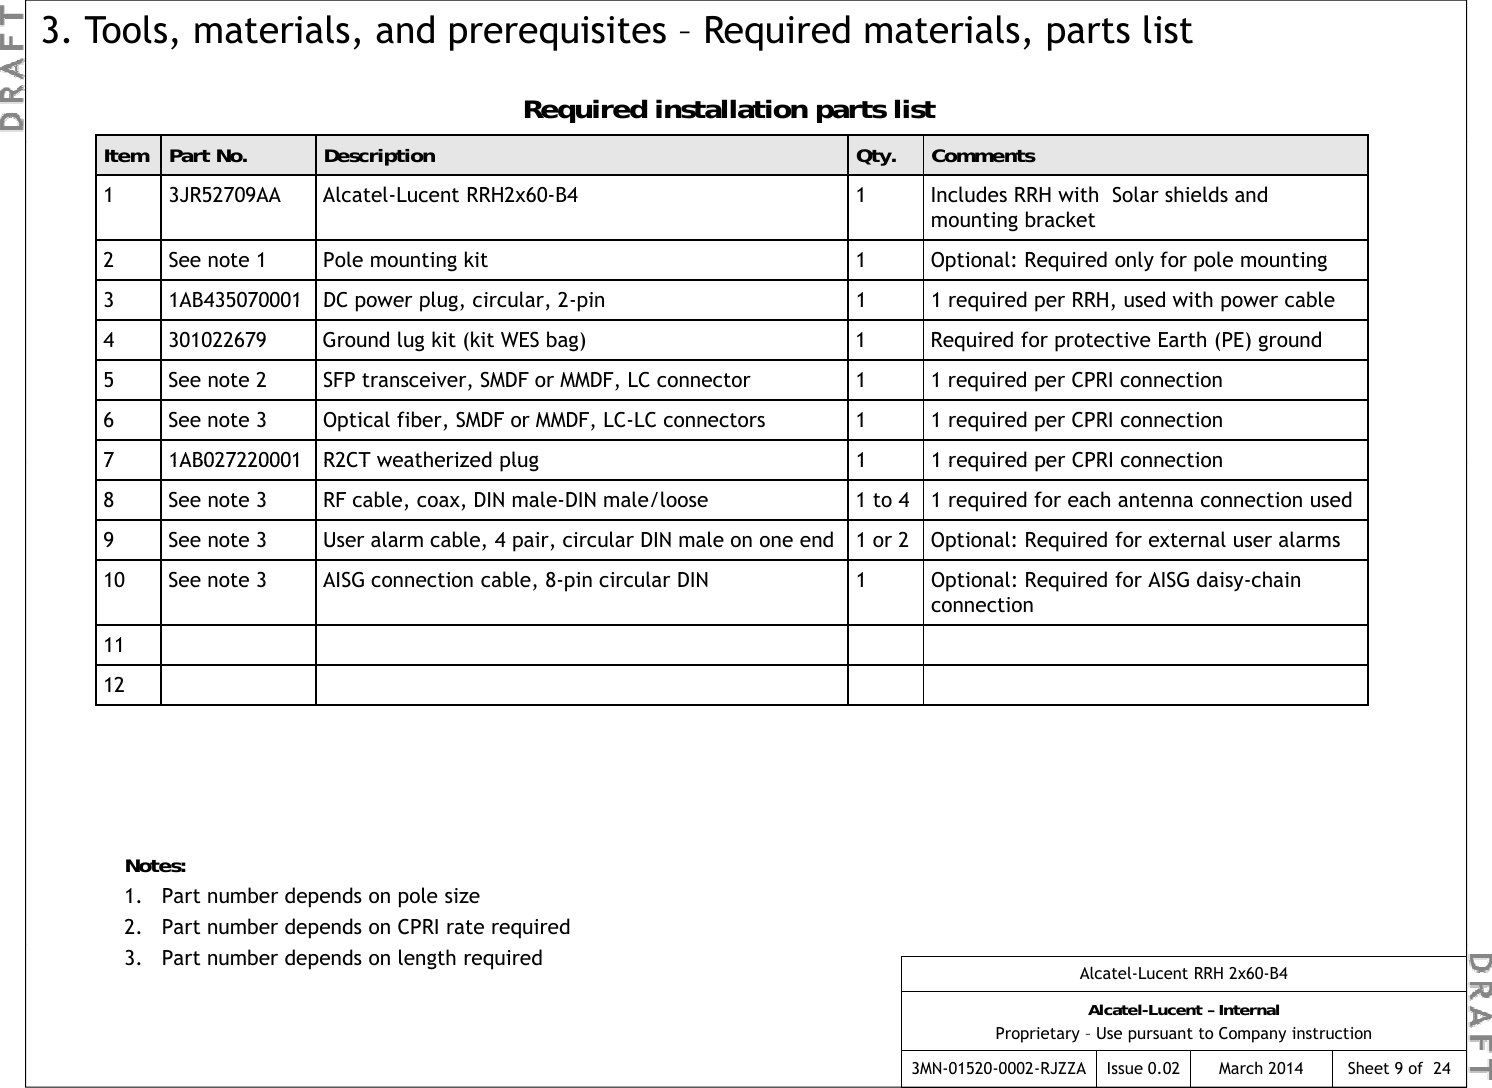 Required installation parts list3. Tools, materials, and prerequisites – Required materials, parts listItem Part No. Description Qty. Comments1 3JR52709AA Alcatel-Lucent RRH2x60-B4 1 Includes RRH with  Solar shields and mounting bracket2 See note 1 Pole mounting kit 1 Optional: Required only for pole mounting31AB435070001DC power plug  circular  2-pin11 required per RRH  used with power cable31AB435070001DC power plug, circular, 2-pin11 required per RRH, used with power cable4 301022679 Ground lug kit (kit WES bag) 1 Required for protective Earth (PE) ground5 See note 2 SFP transceiver, SMDF or MMDF, LC connector 1 1 required per CPRI connection6 See note 3 Optical fiber, SMDF or MMDF, LC-LC connectors 1 1 required per CPRI connection71AB027220001R2CT weatherized plug11required per CPRI connection71AB027220001R2CT weatherized plug11required per CPRI connection8 See note 3 RF cable, coax, DIN male-DIN male/loose  1 to 4 1 required for each antenna connection used9 See note 3 User alarm cable, 4 pair, circular DIN male on one end 1 or 2 Optional: Required for external user alarms10 See note 3 AISG connection cable, 8-pin circular DIN 1 Optional: Required for AISG daisy-chain connection1112Notes:1. Part number depends on pole size2. Part number depends on CPRI rate requiredAlcatel-Lucent RRH 2x60-B4Alcatel-Lucent – InternalProprietary – Use pursuant to Company instruction3MN-01520-0002-RJZZA Issue 0.02 March 20143. Part number depends on length requiredSheet 9 of  24